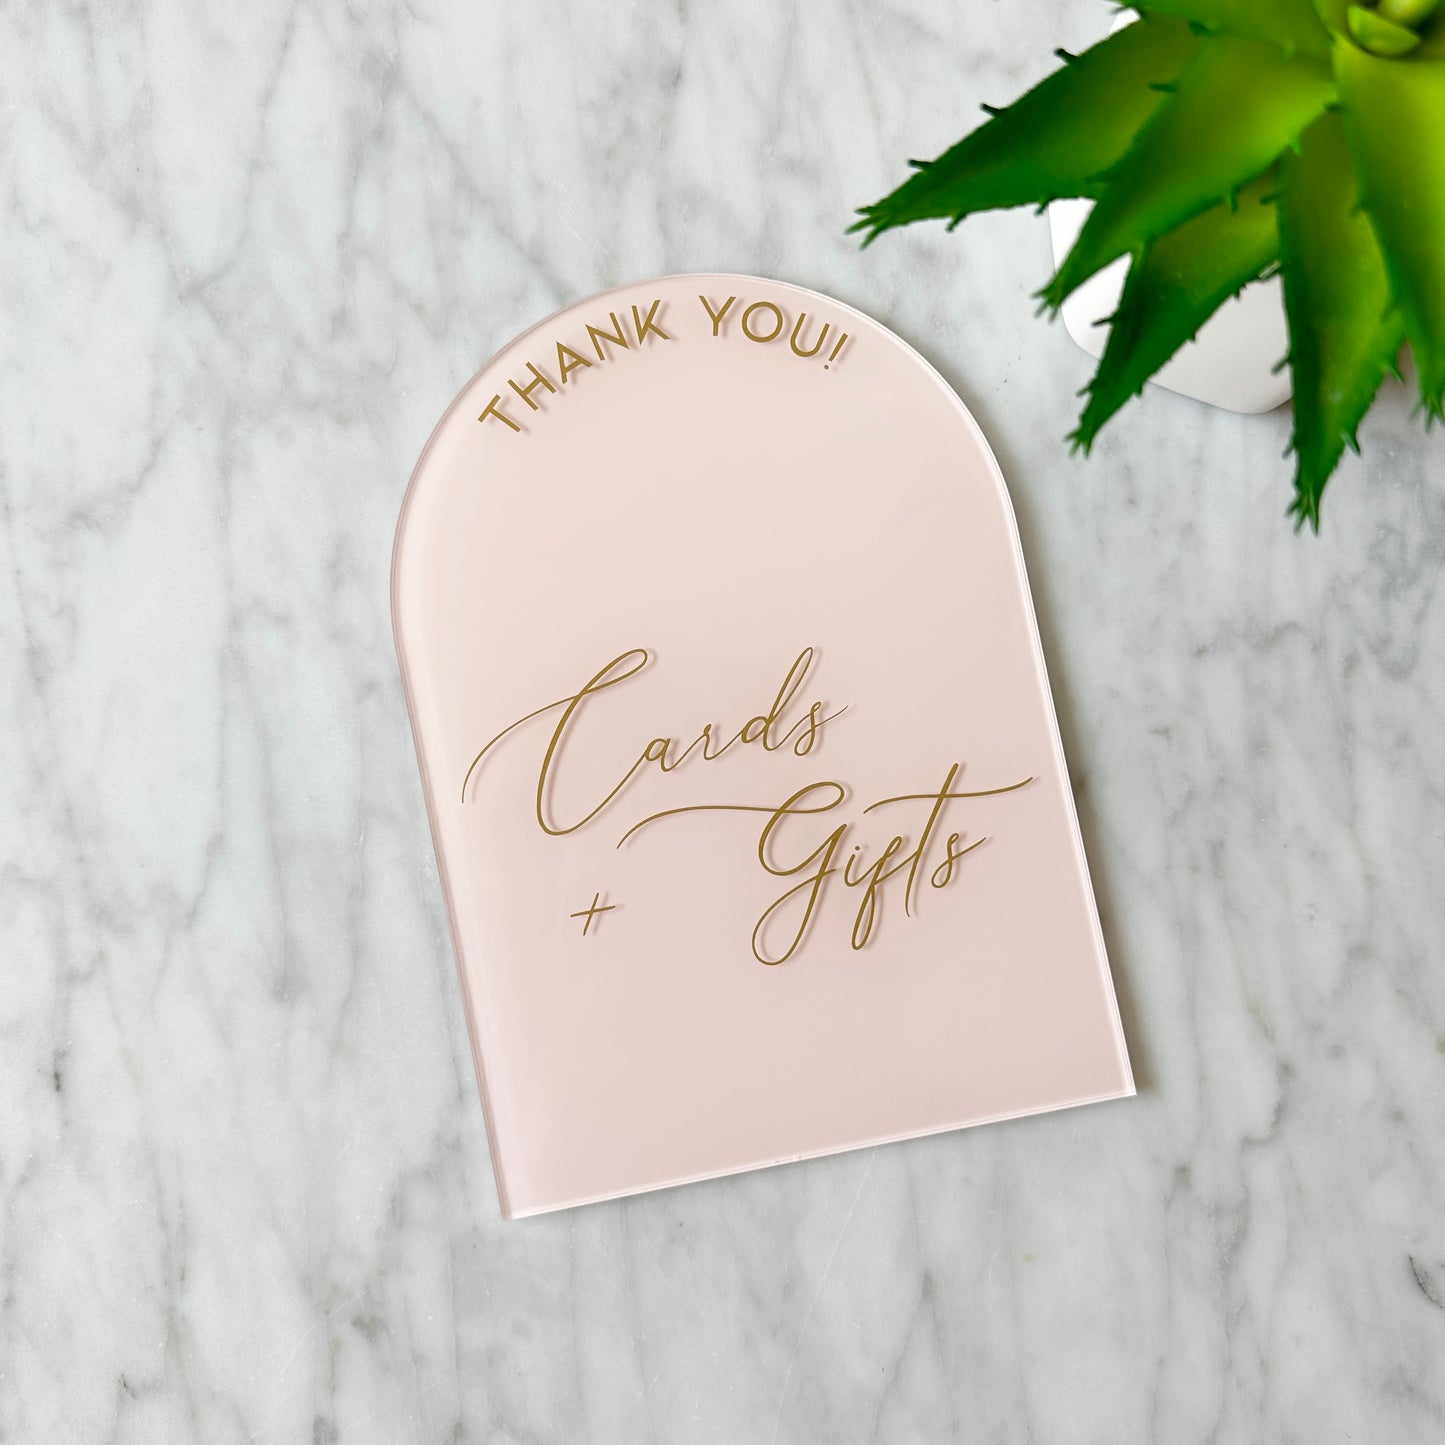 Cards & Gifts Table Sign - Arched Custom